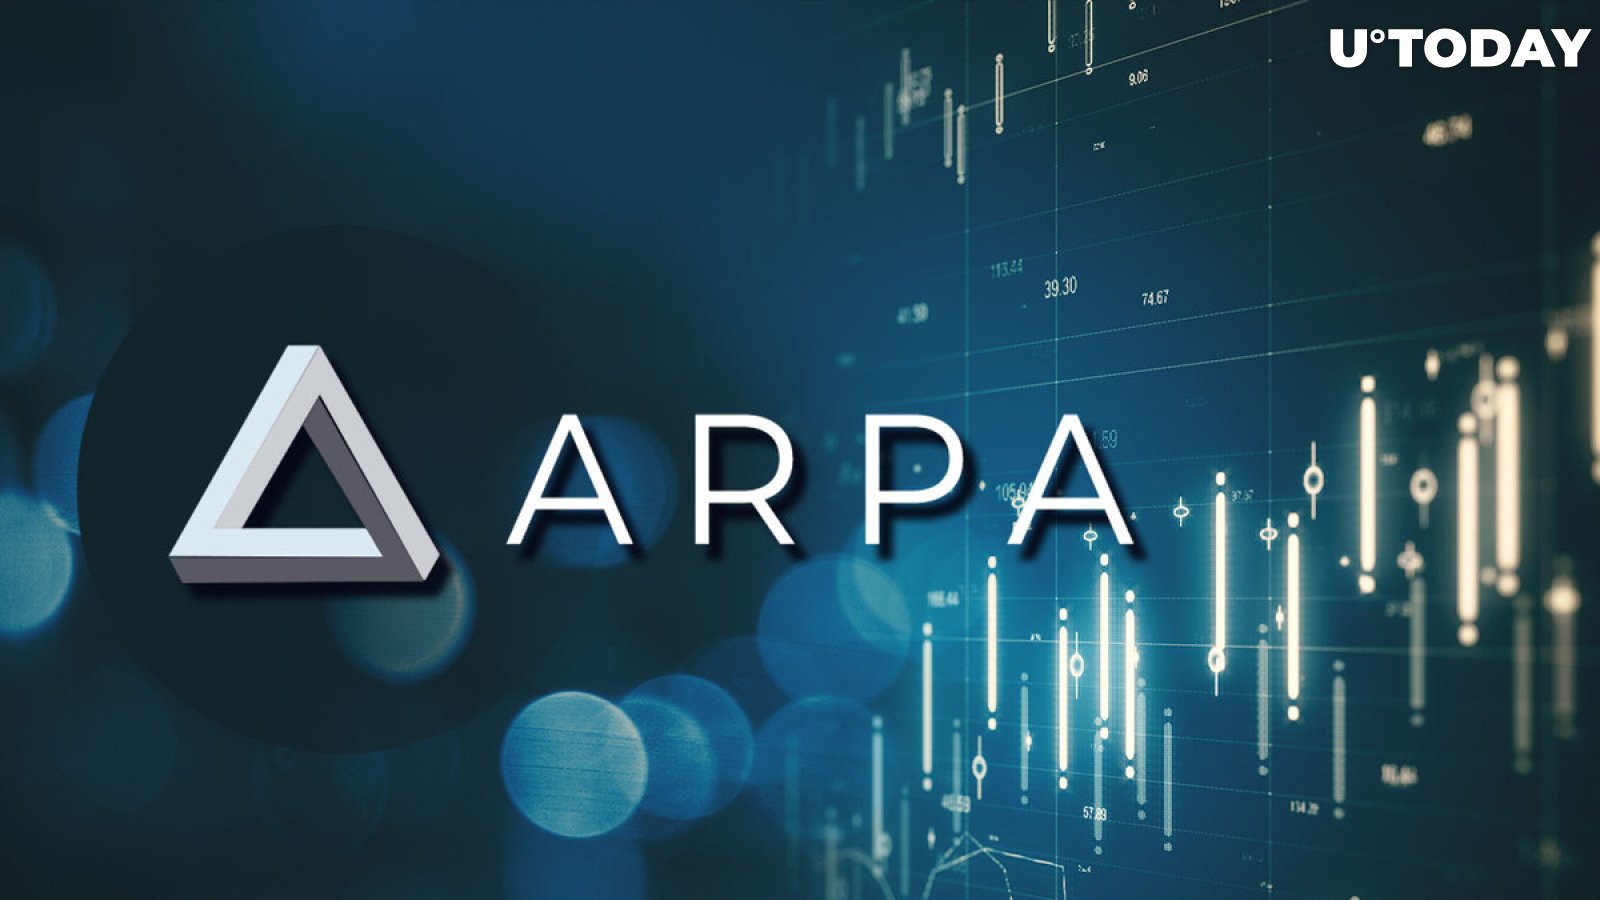 ARPA Network Jumps 40% After Introducing Long Sought Product: Details